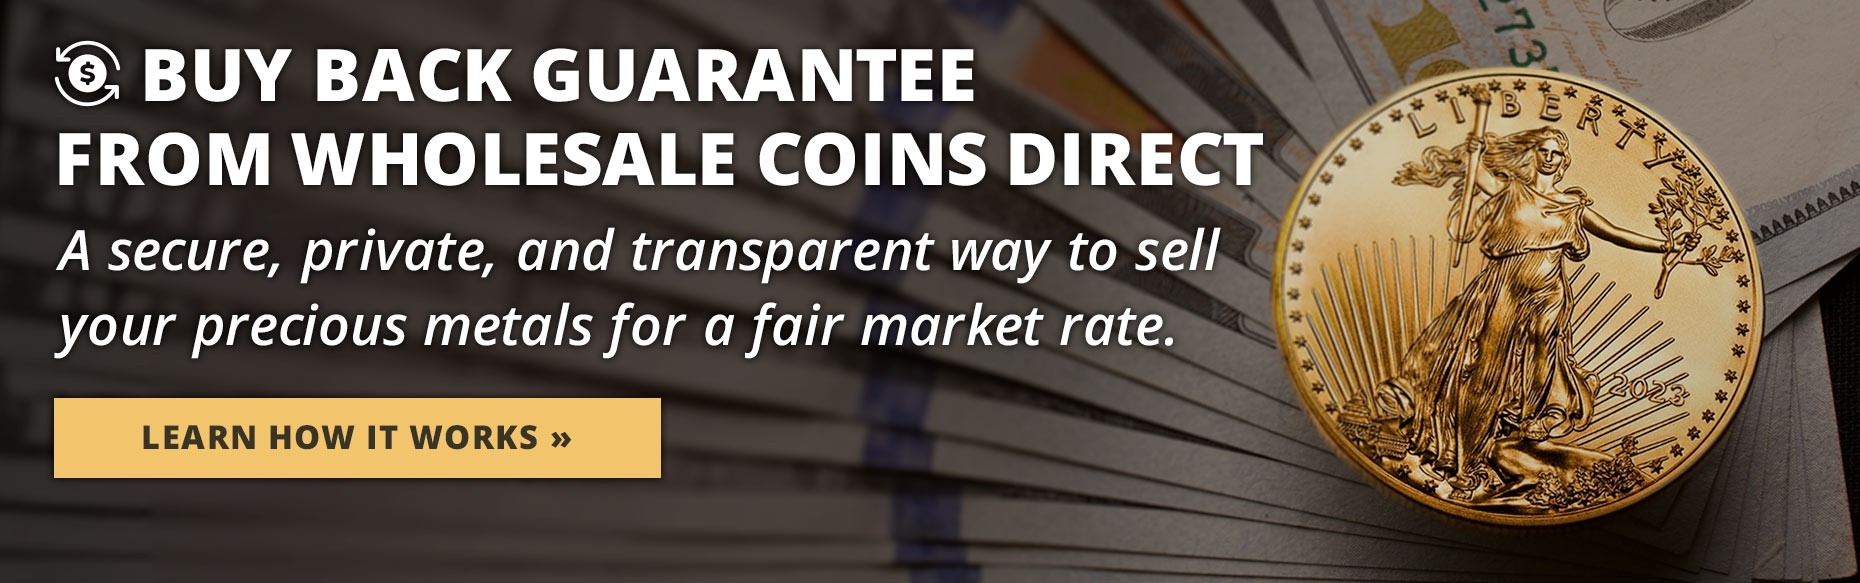 Buy Back Guarantee From Wholesale Coins Direct